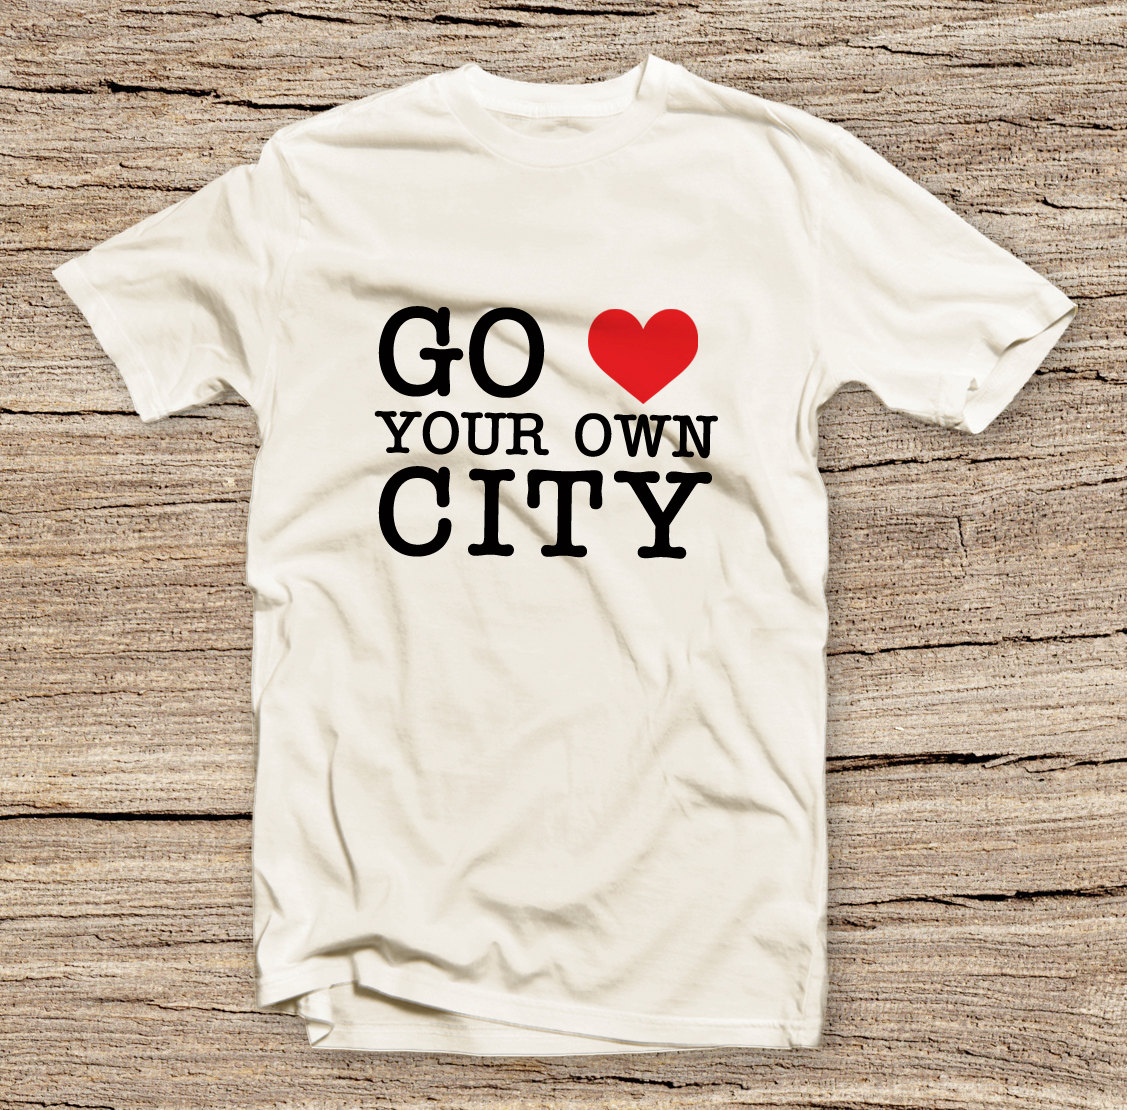 Pts-143 Go Love Your Own City Style T-shirt, Unisex Tee, Fashion Printed T-shirt